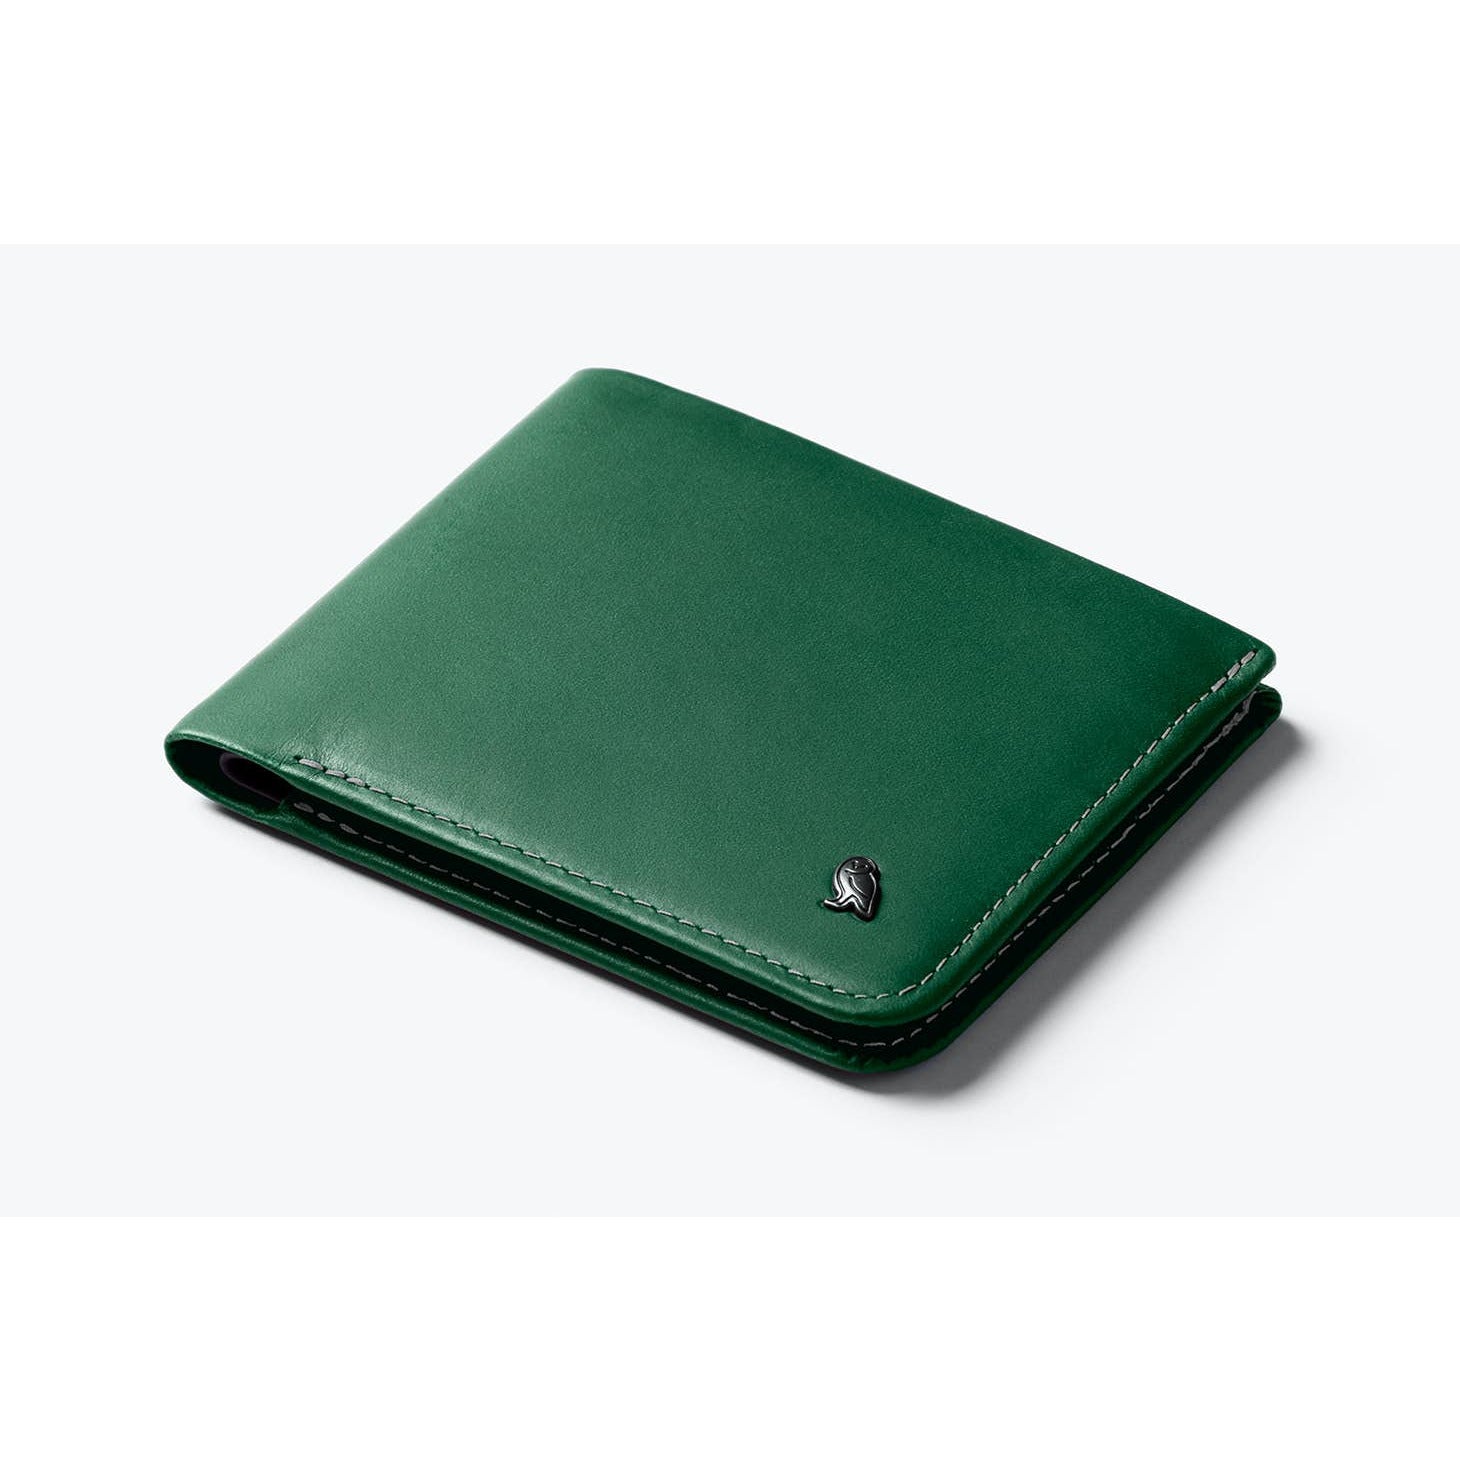 Sap Green Vegan Leather Zipper Slim Card & Coin Wallet Buy At DailyObjects